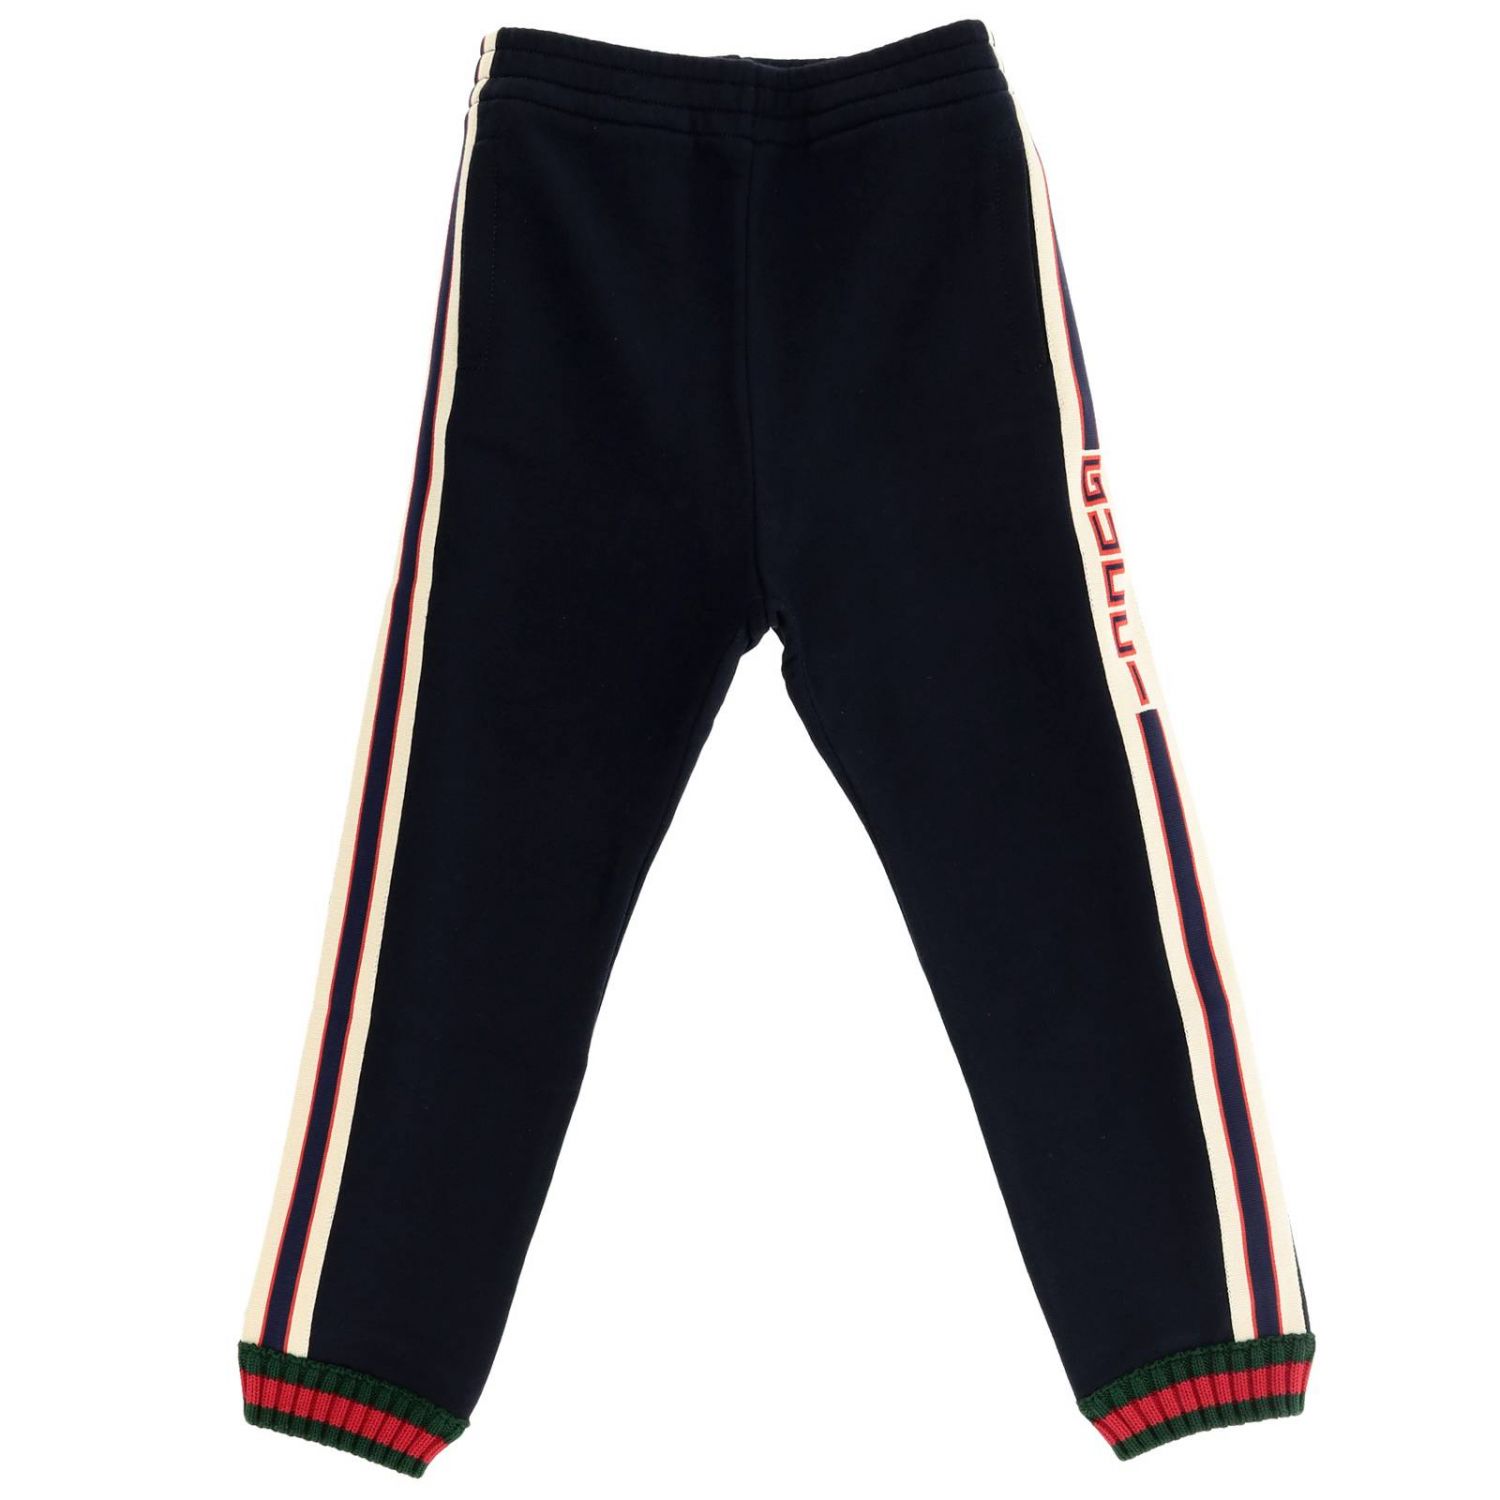 gucci pants for kids